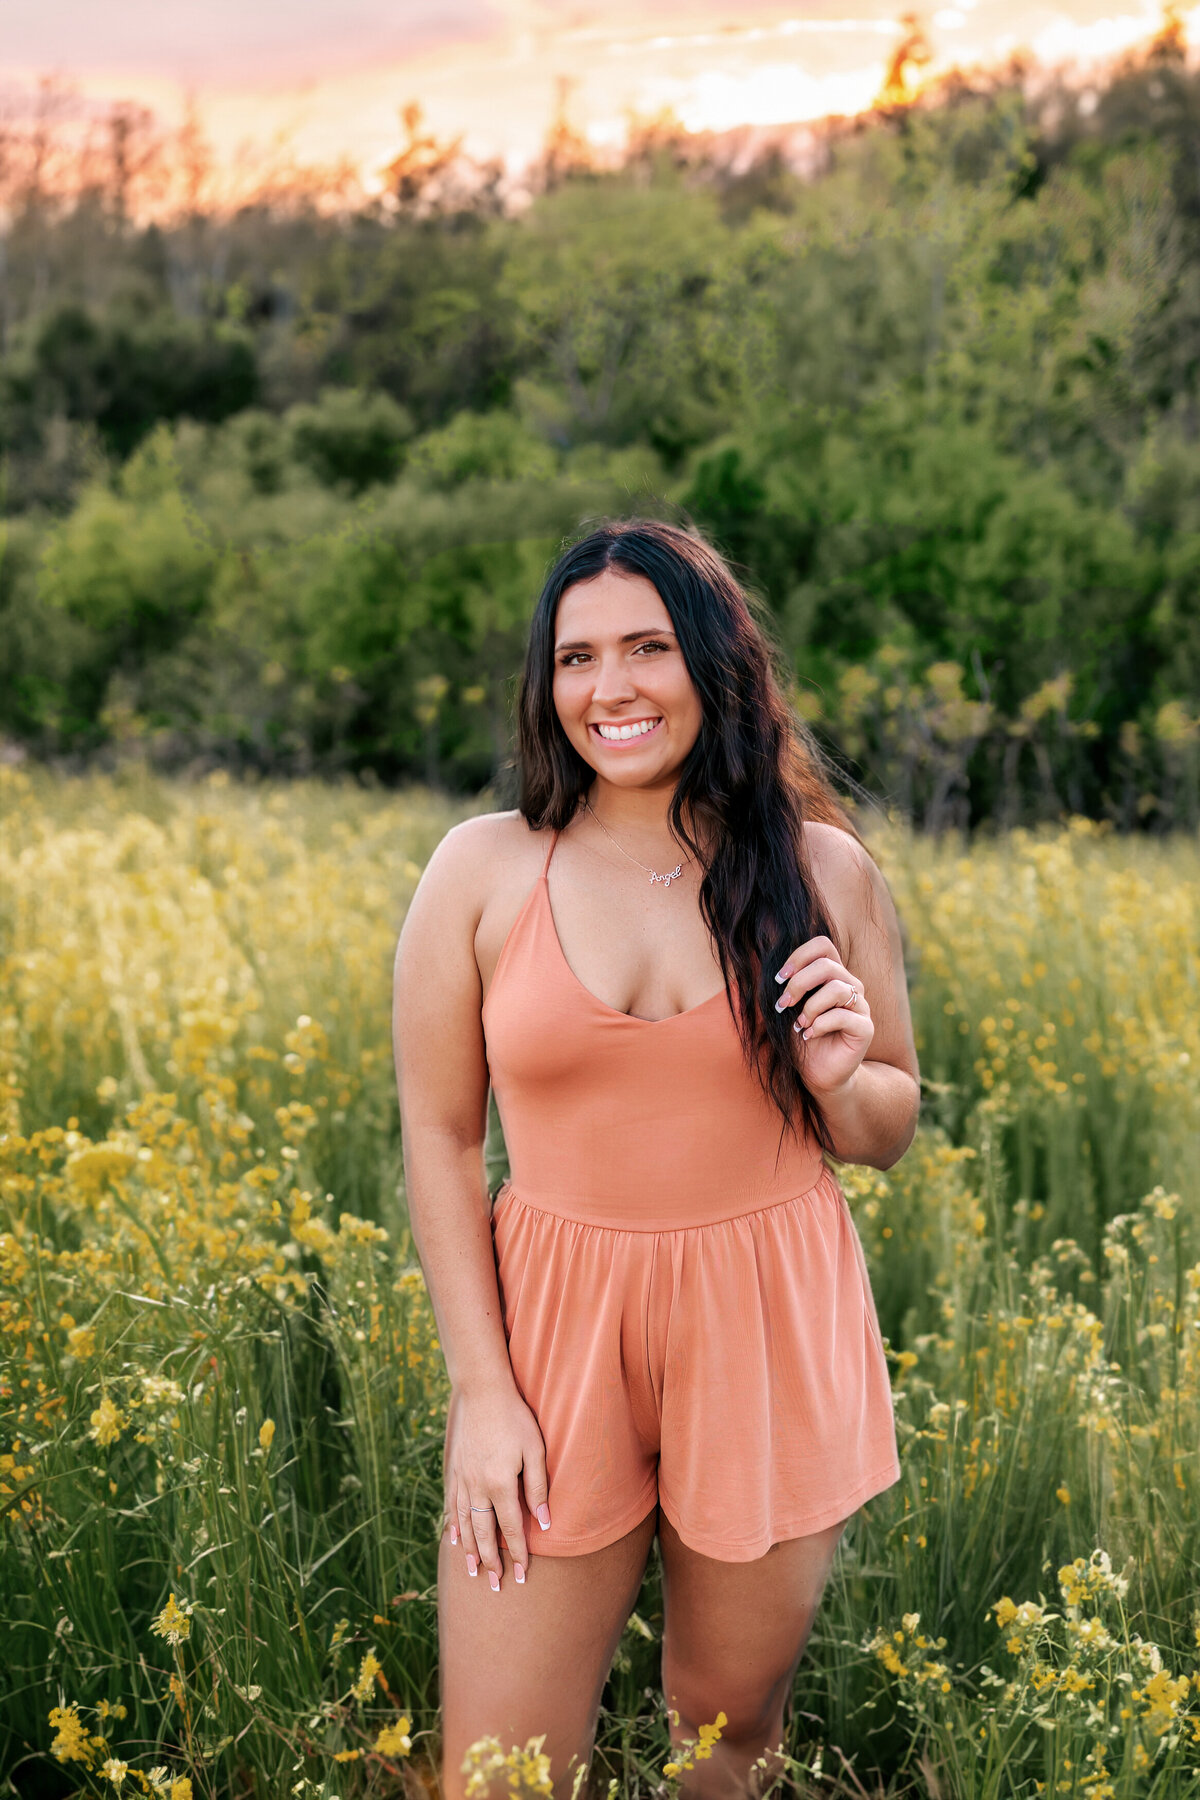 A beautiful girl is posing for her senior portraits in a field of wild flowers and tall grass at sunset.